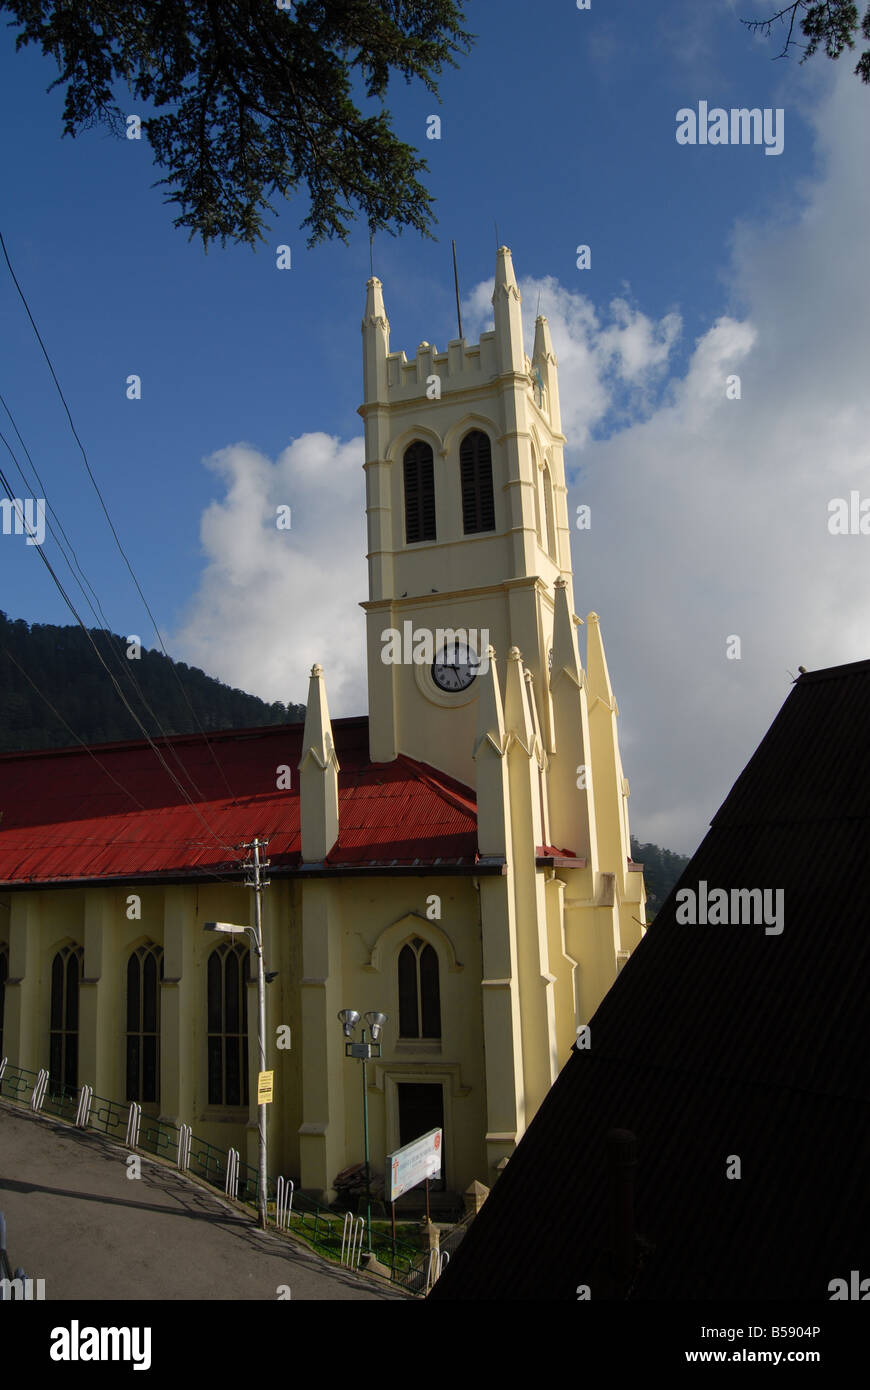 View of the main landmark The Christ Church in Shimla, Himachal Pradesh, a Hill Station in North India Stock Photo